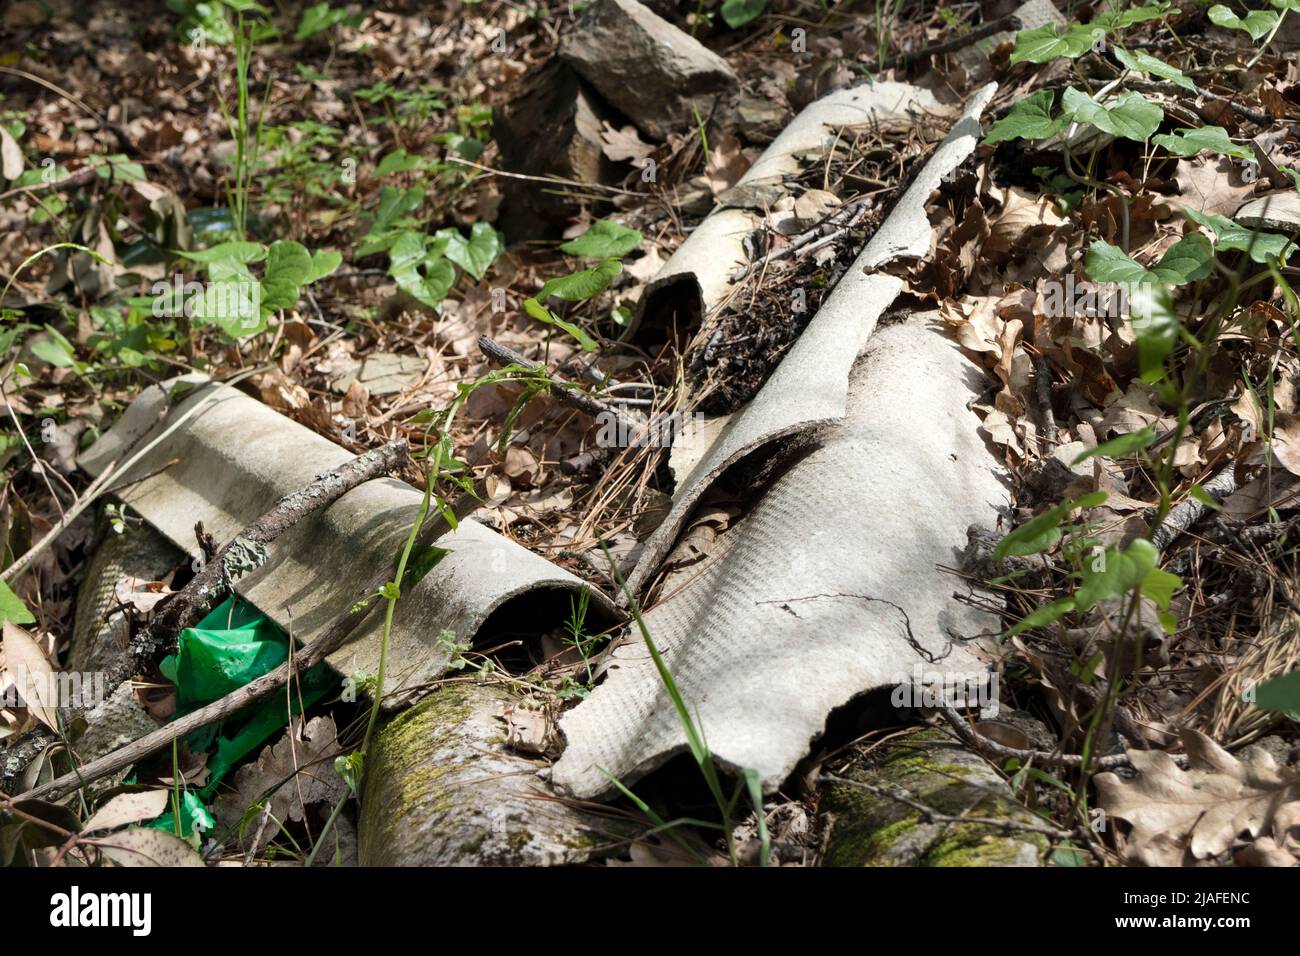 Asbestos Roofing Material Dumped in a Woodland Environment at the side of a Road. Stock Photo